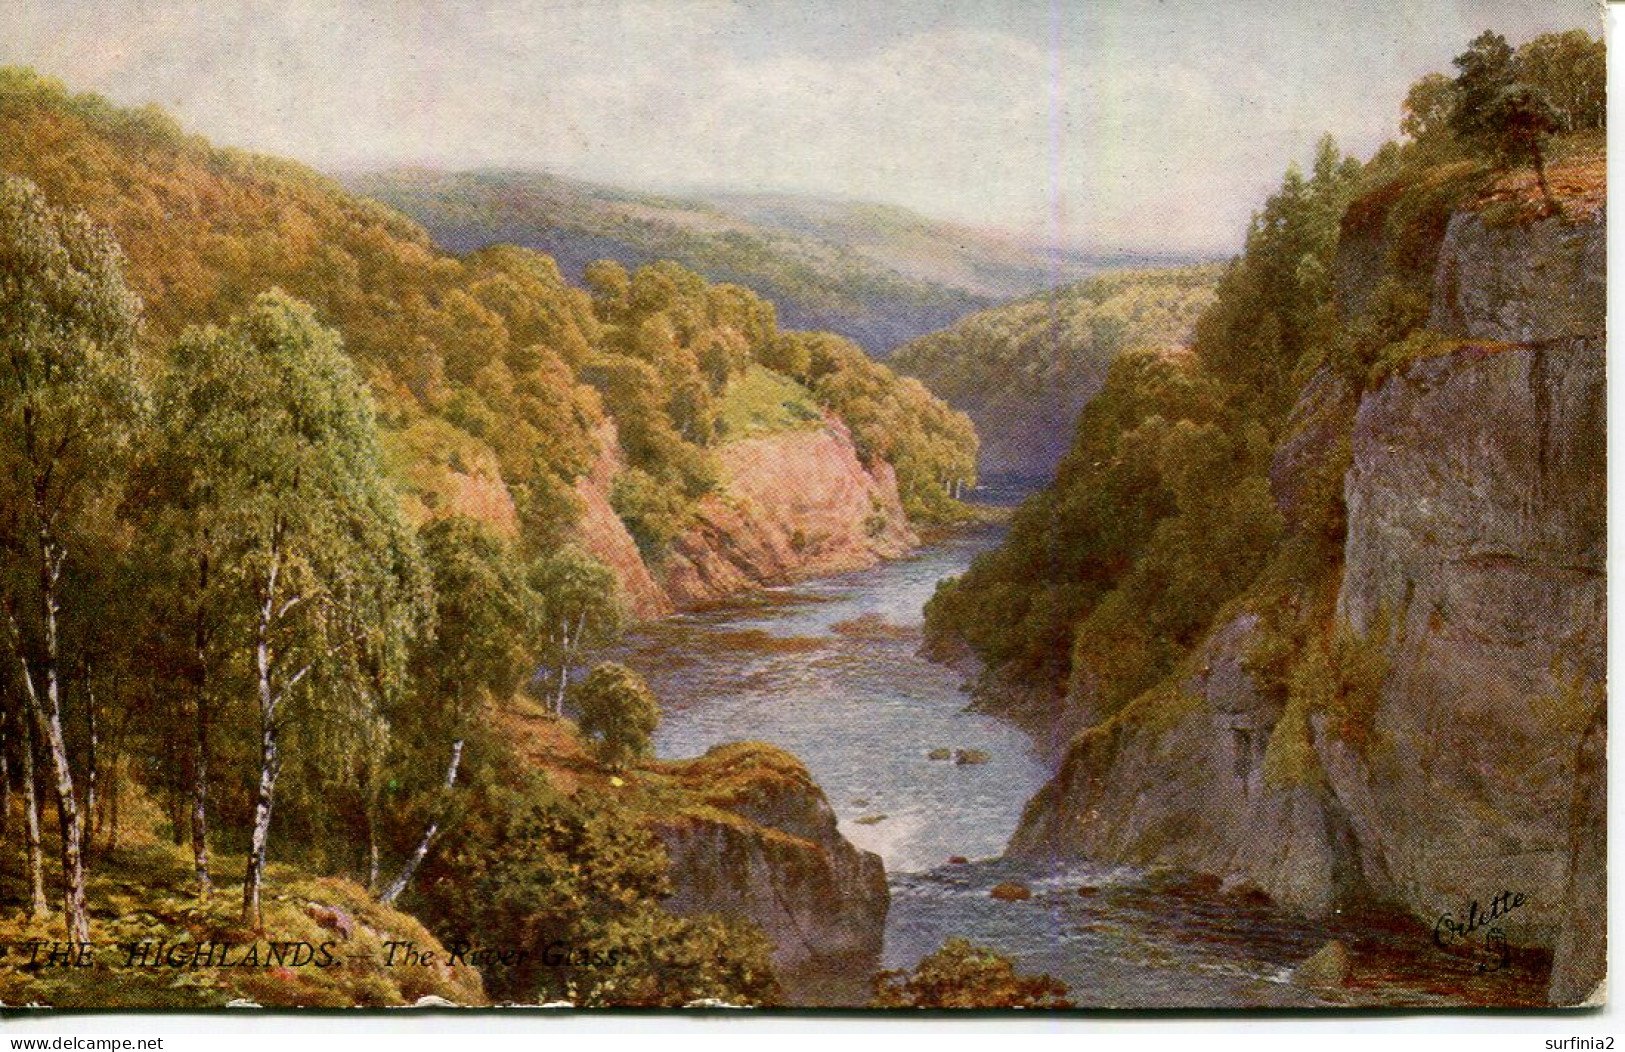 TUCKS OILETTE 7349 - THE HIGHLANDS - THE RIVER GLASS By SUTTON PALMER - Perthshire